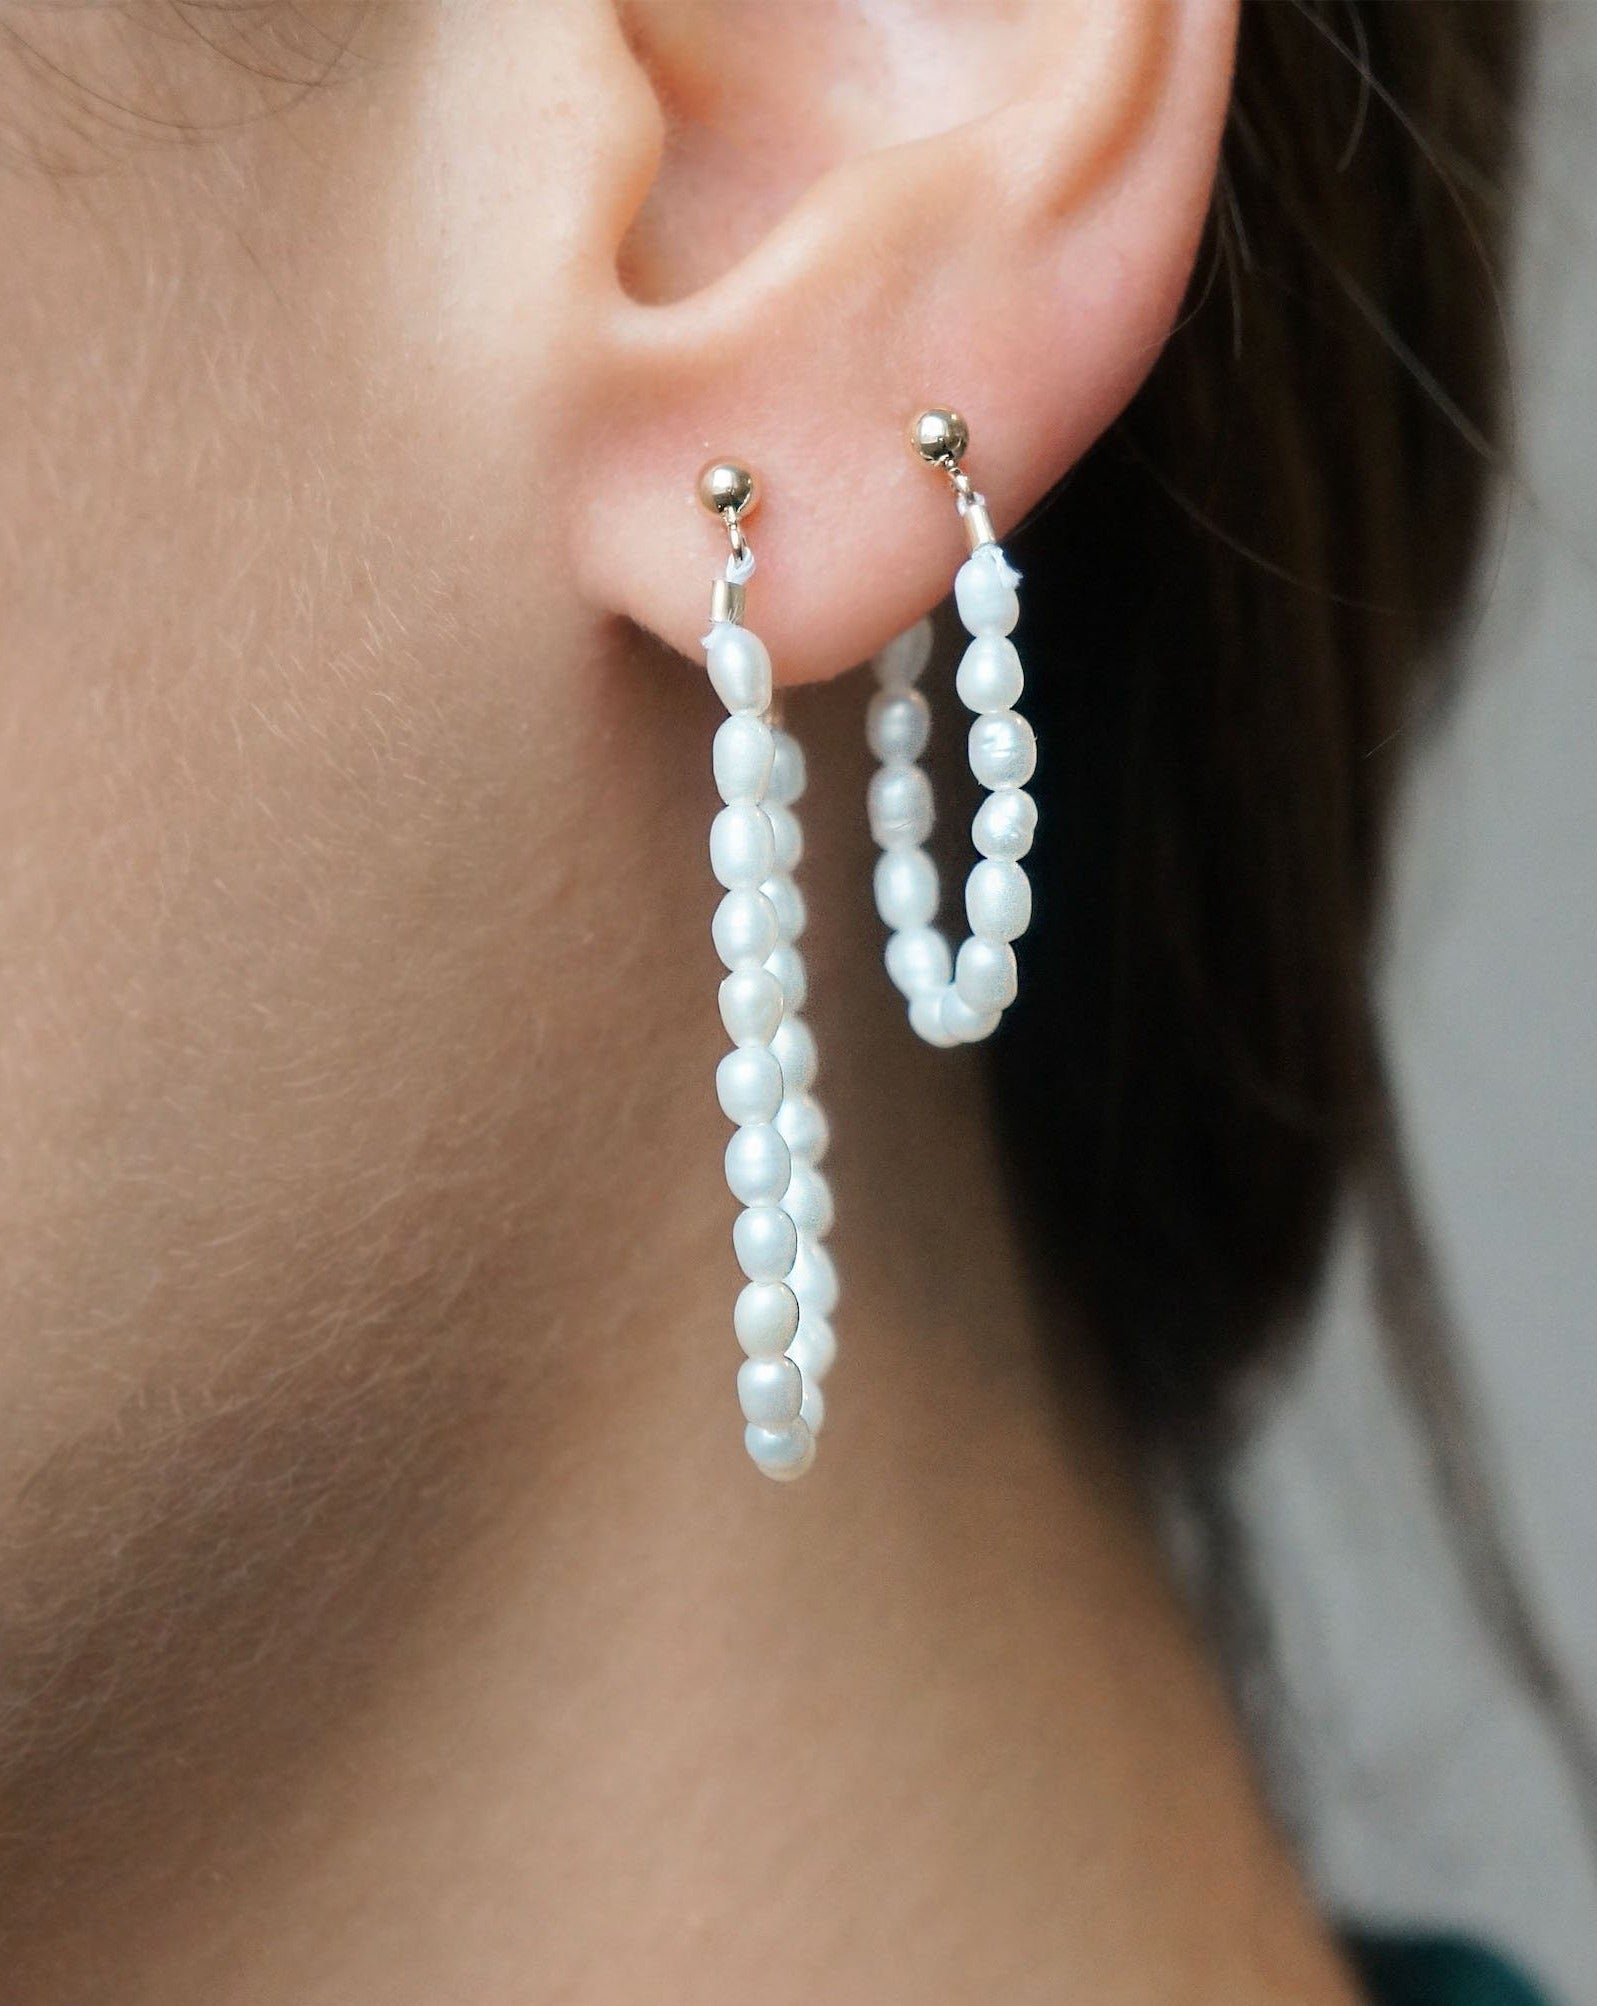 Dream Earrings by Kozakh. 3mm ball earring stud, crafted in 14K Gold Filled, featuring a 1 inch drop length of 3mm white Rice Pearls.